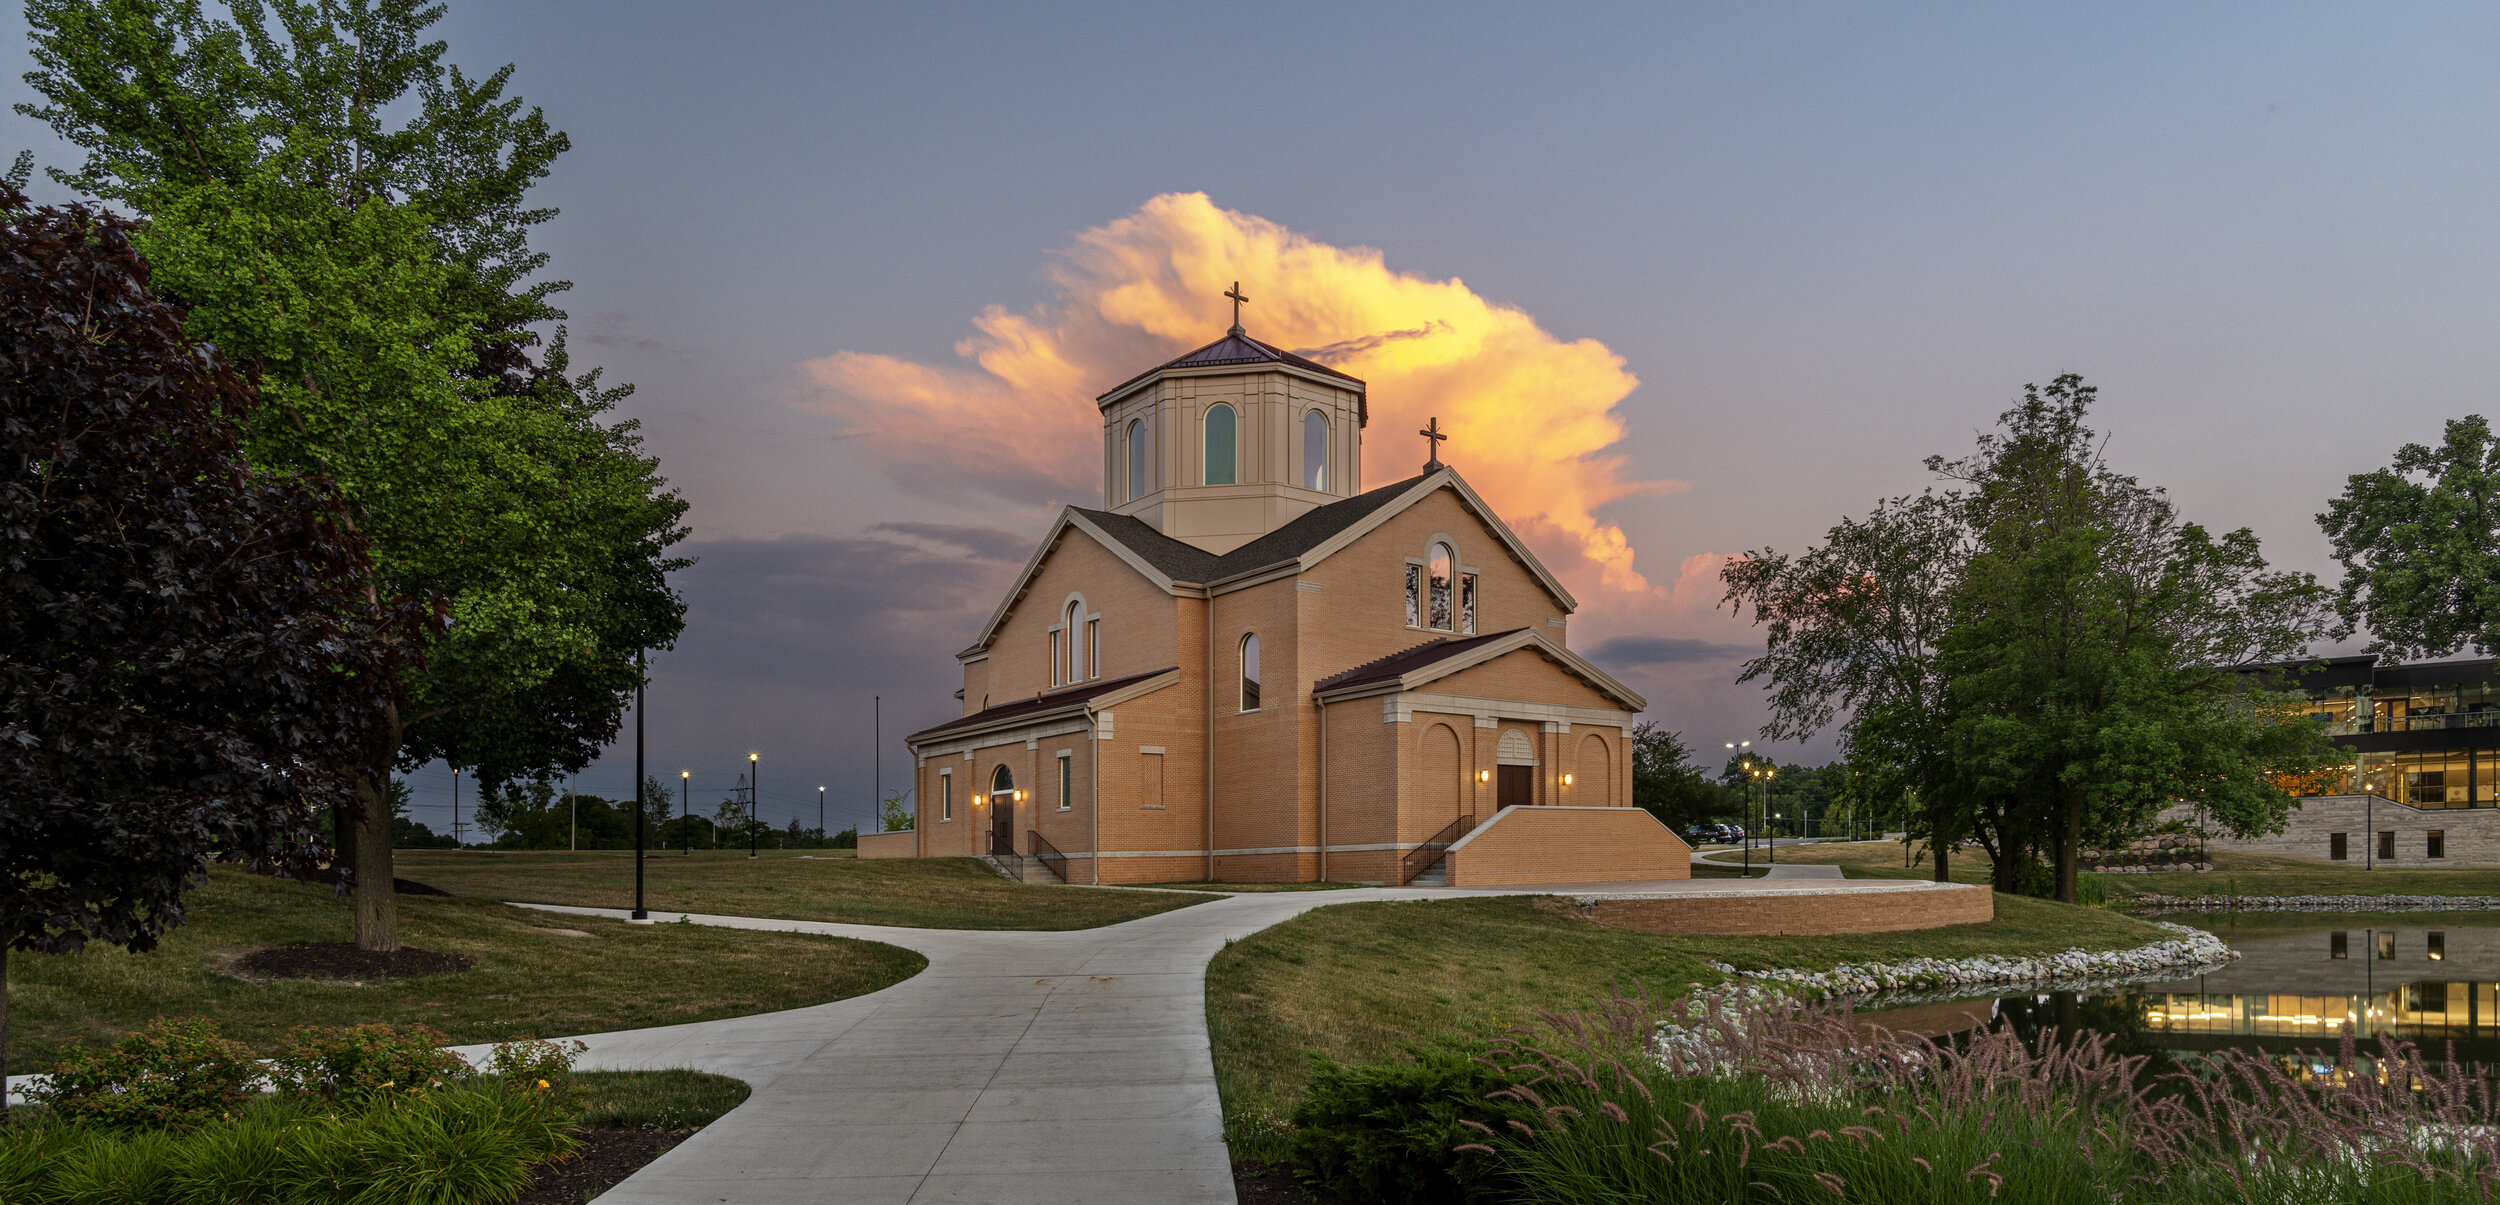 A photography of an isolated church in front of a yellow cloud.